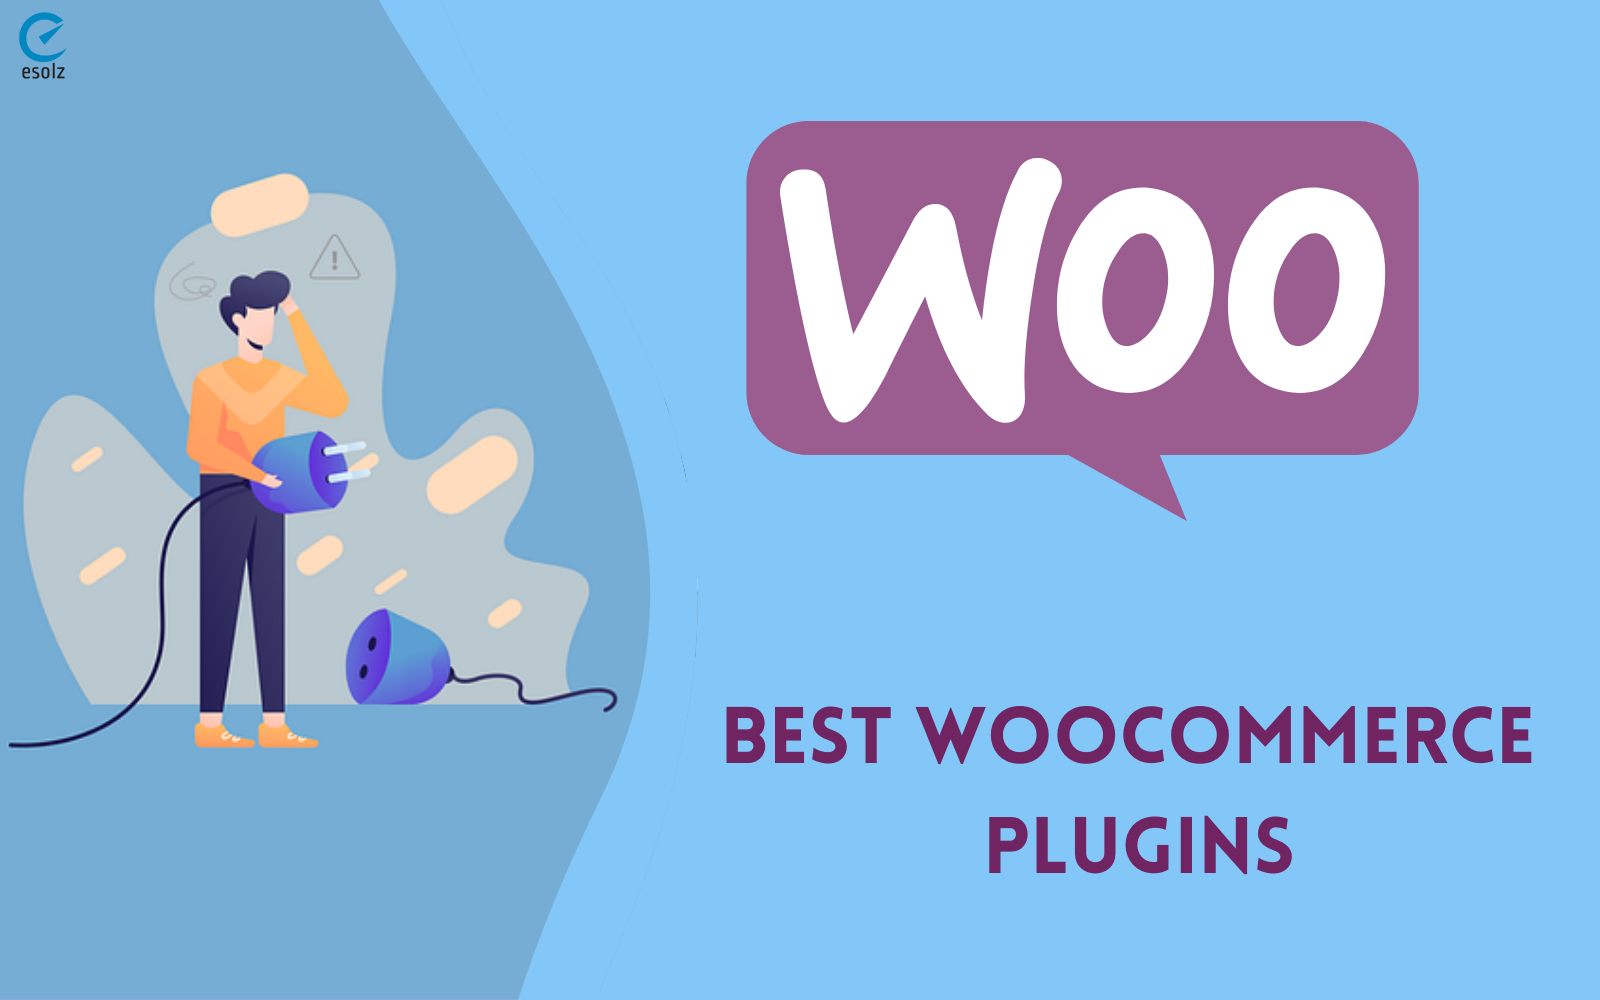 4 Best WooCommerce Plugins For Improving Your Store’s Built-in Functionality